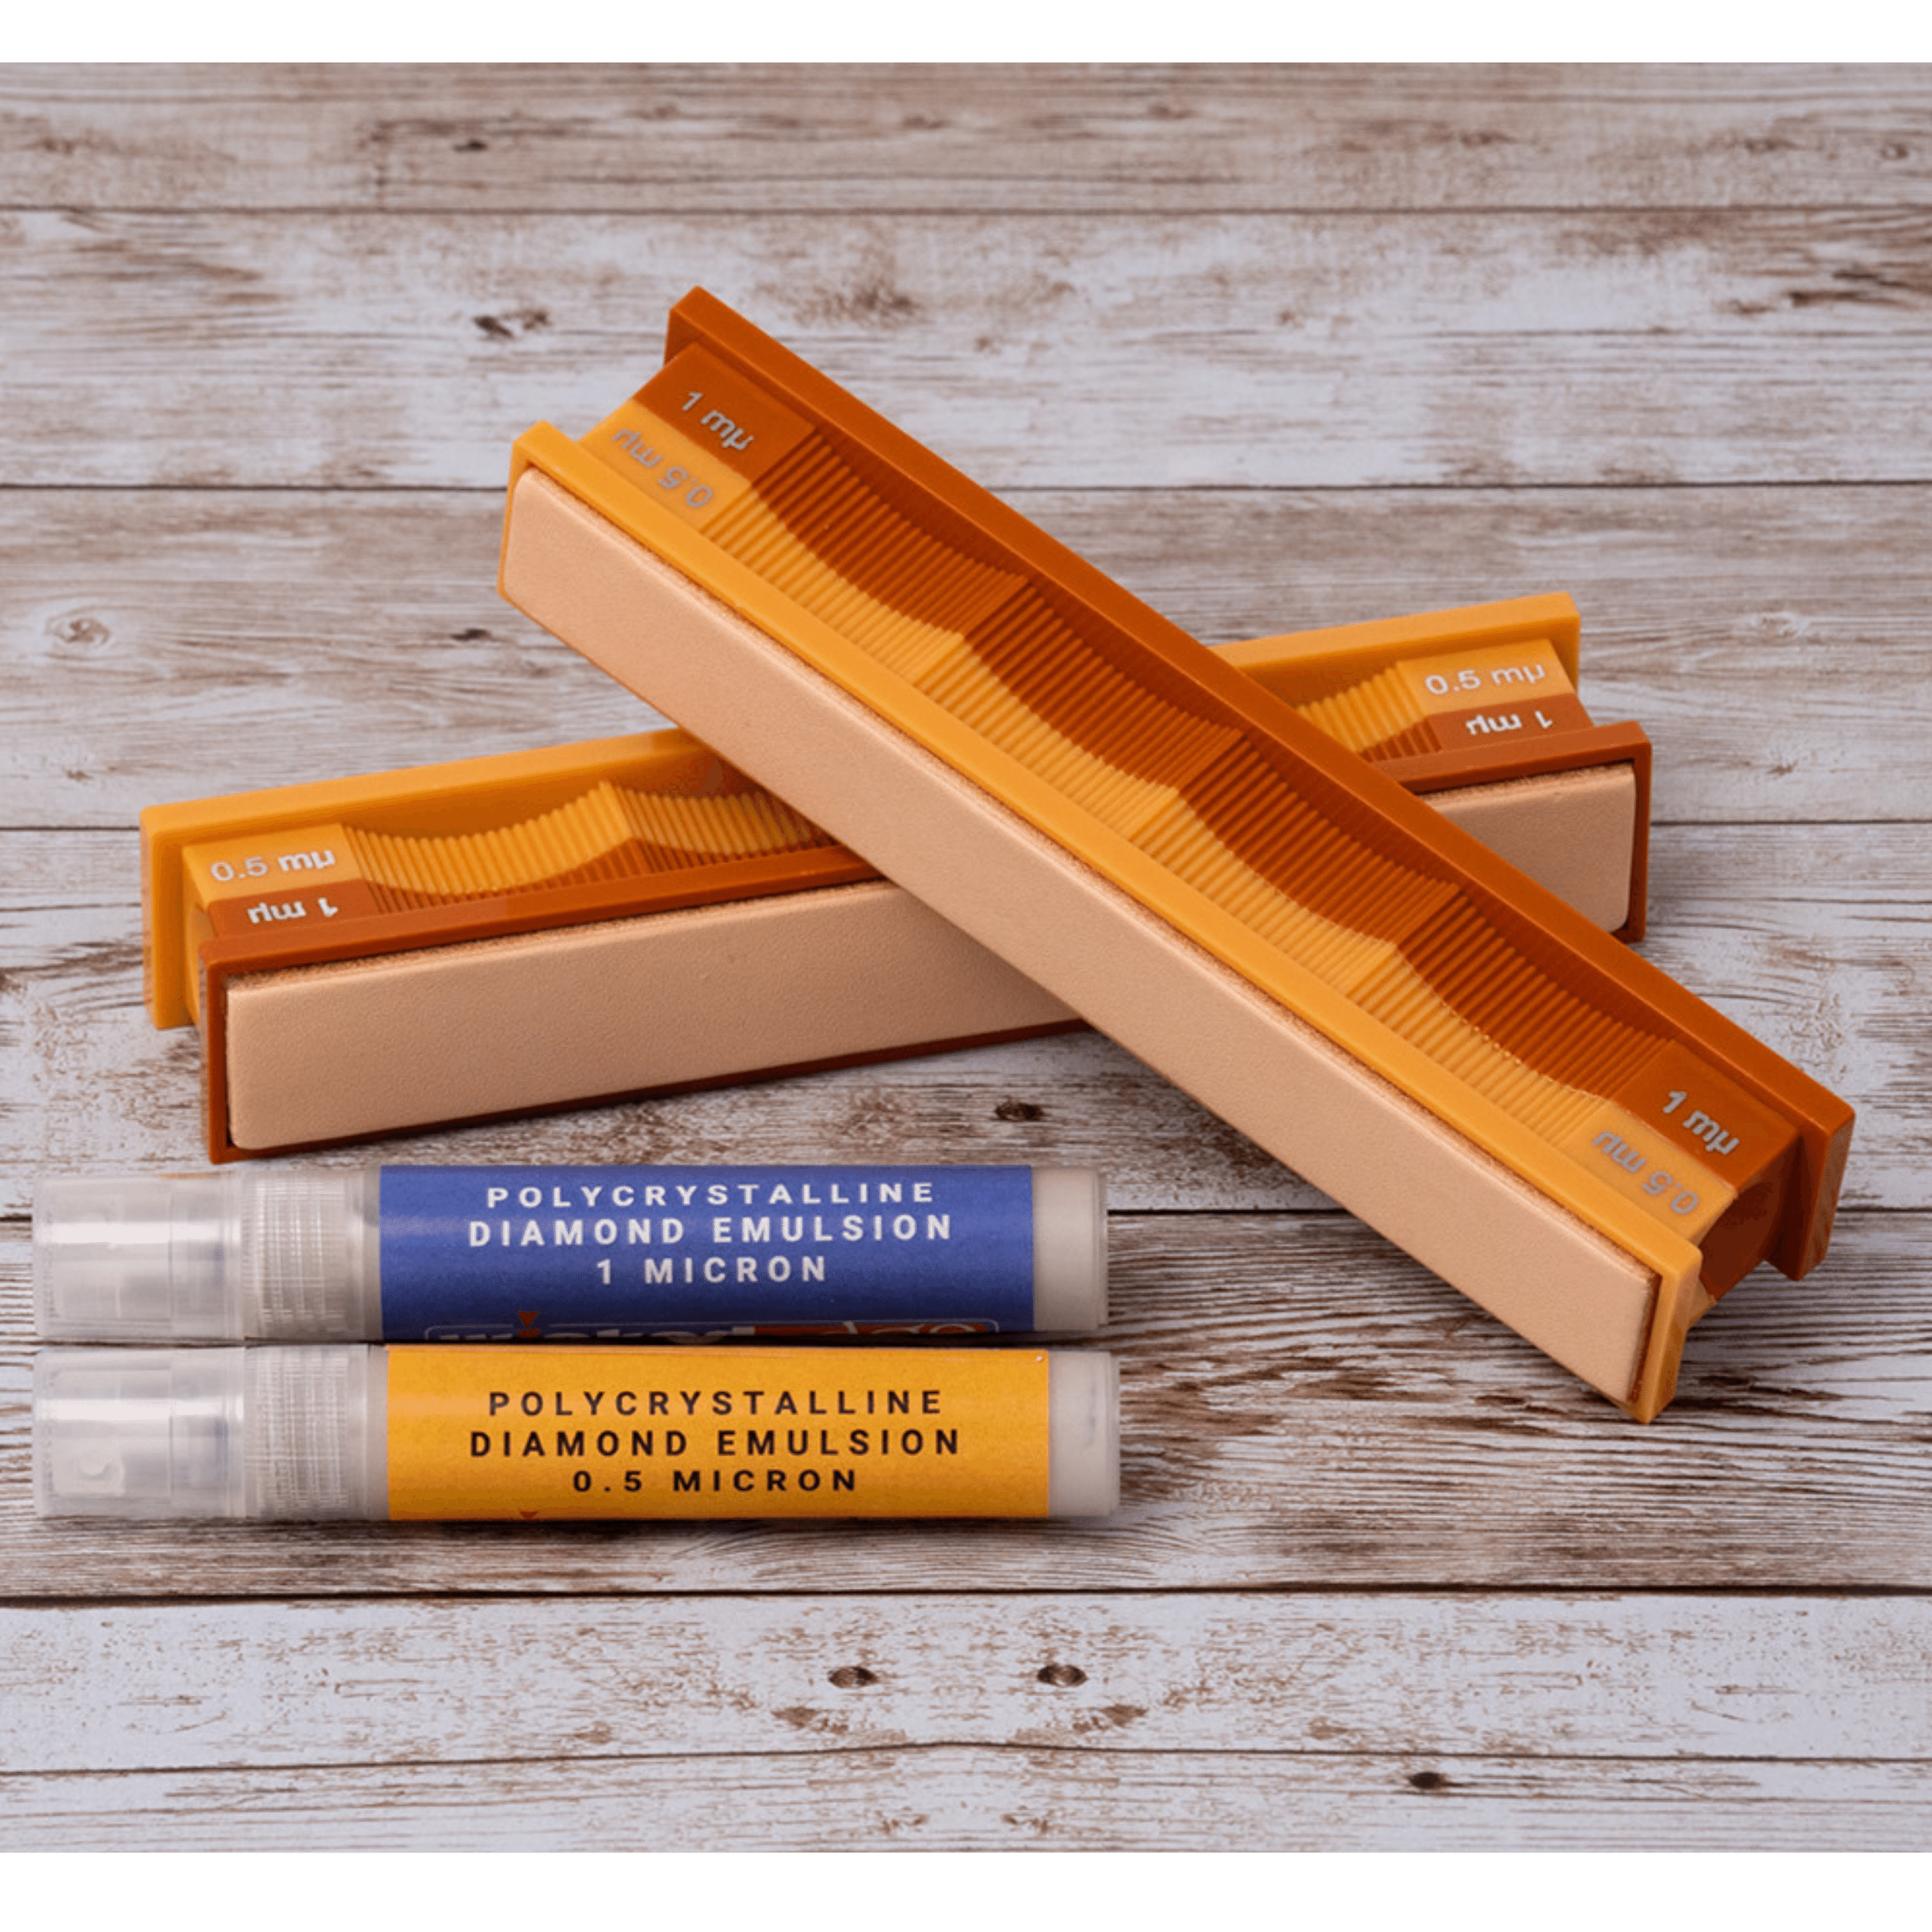 1/0.5 Micron Diamond Emulsion and Leather Strops Pack